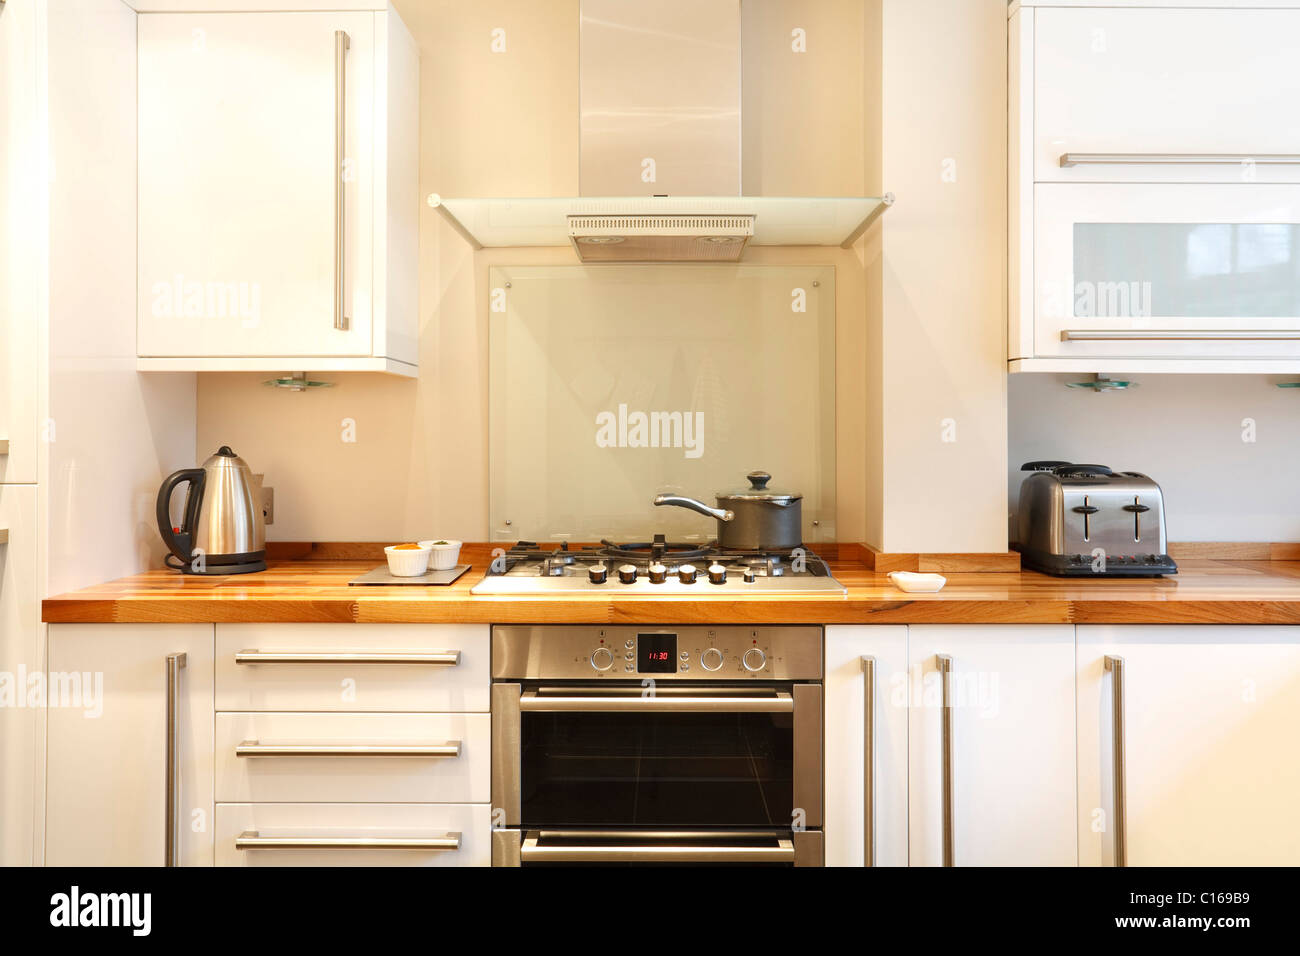 Modern kitchen with a gas hob, chimney hood, wooden worktops and stainless steel appliances Stock Photo